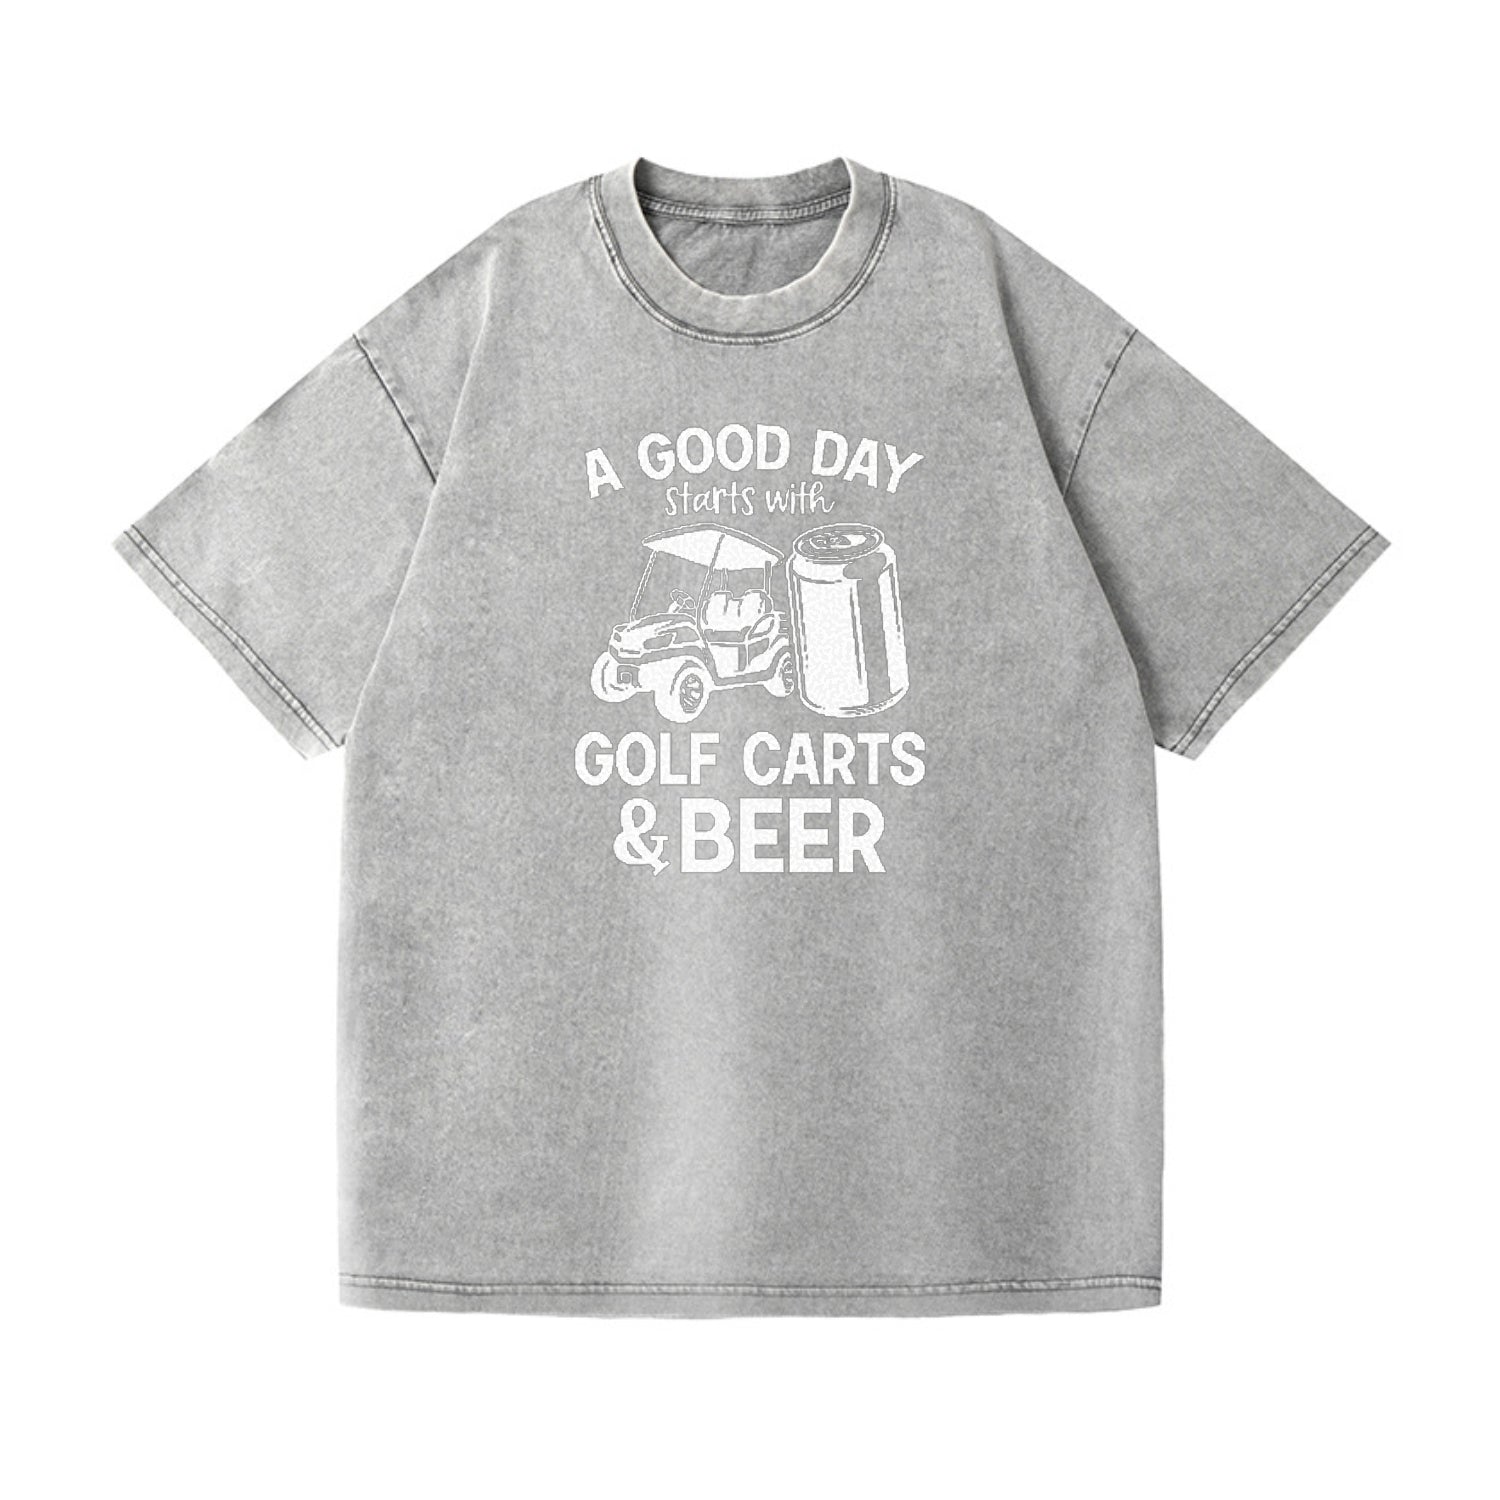 A Good Day Starts With Golf Carts And Beer Vintage T-shirt